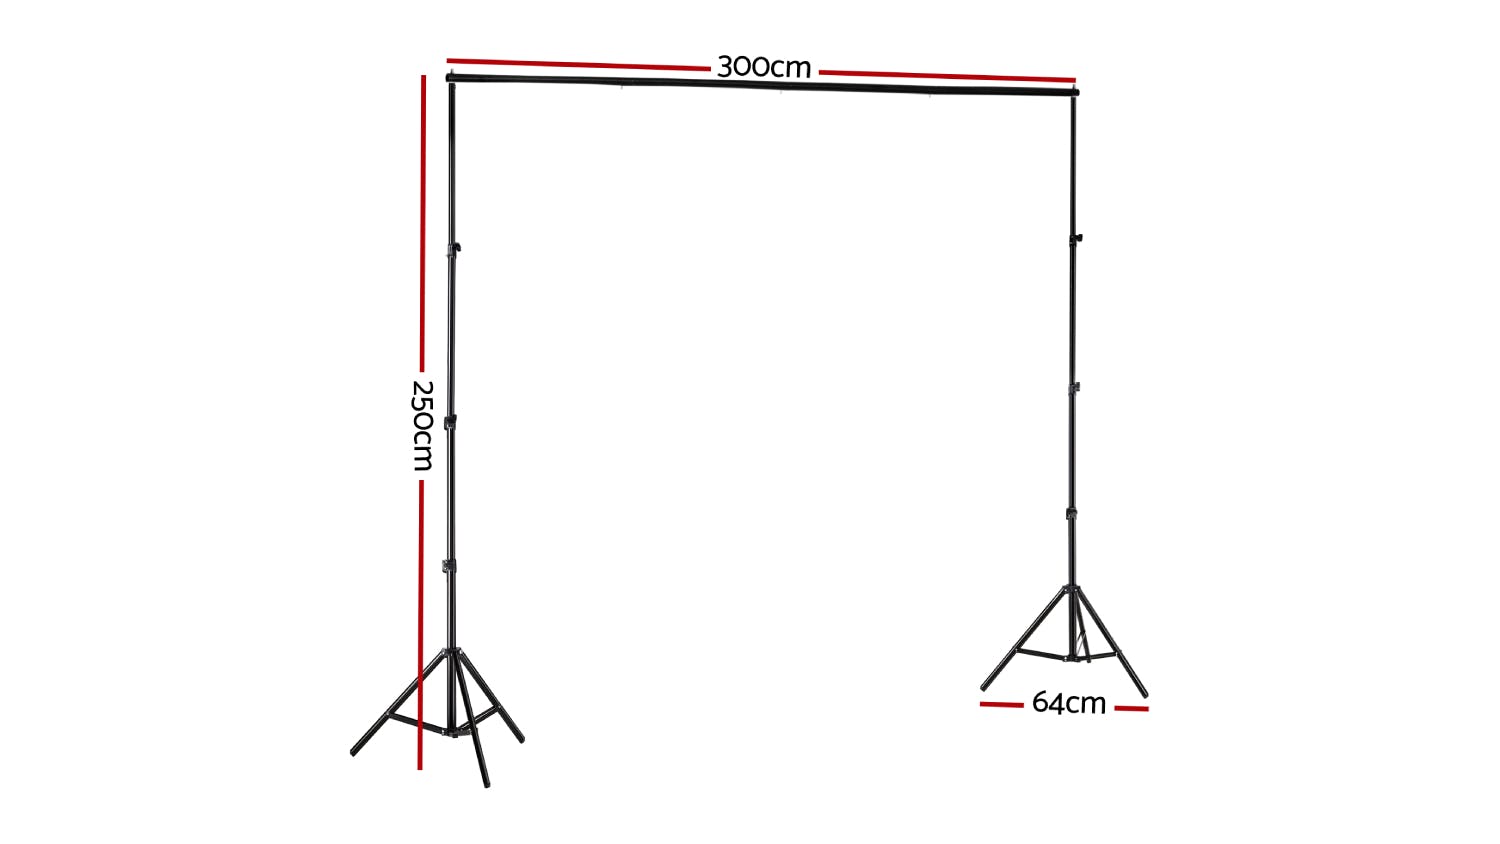 New Aim Photography Backdrop Tapestry Frame 2.5 x 3m with Secure Clips & Sandbags, Carry Bag